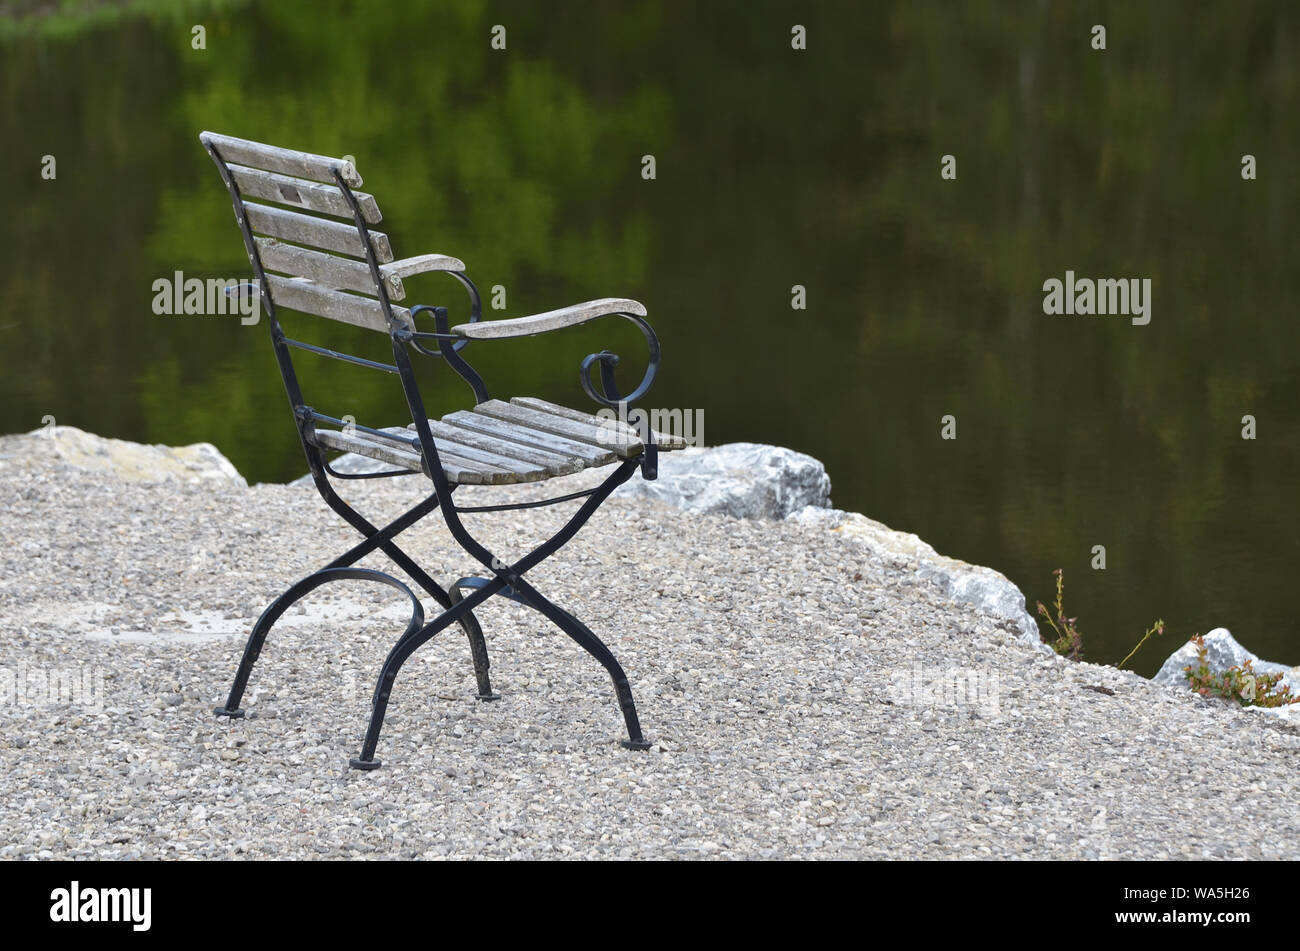 lonely chair at lake Stock Photo